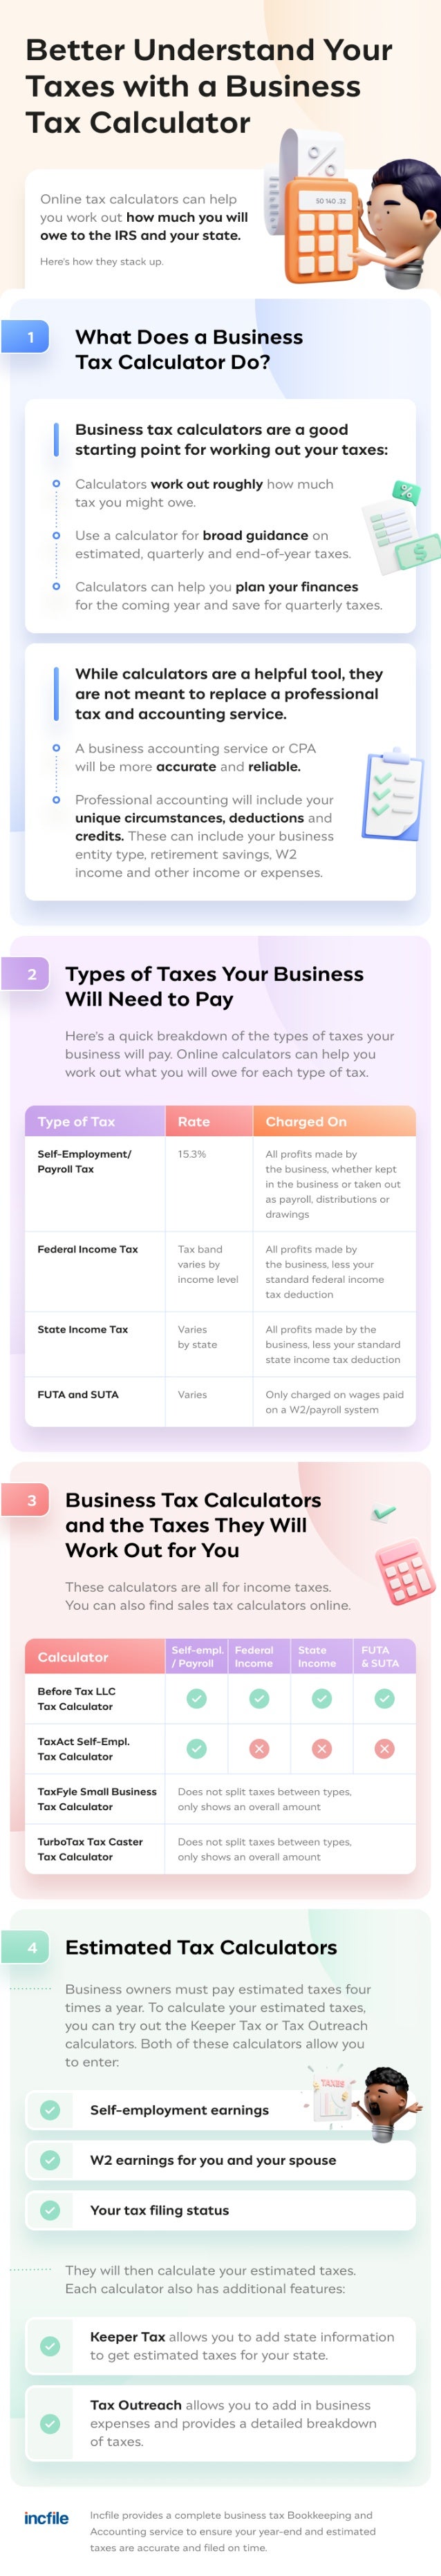 How to Optimize Tax Preparation Using a Business Tax Calculator